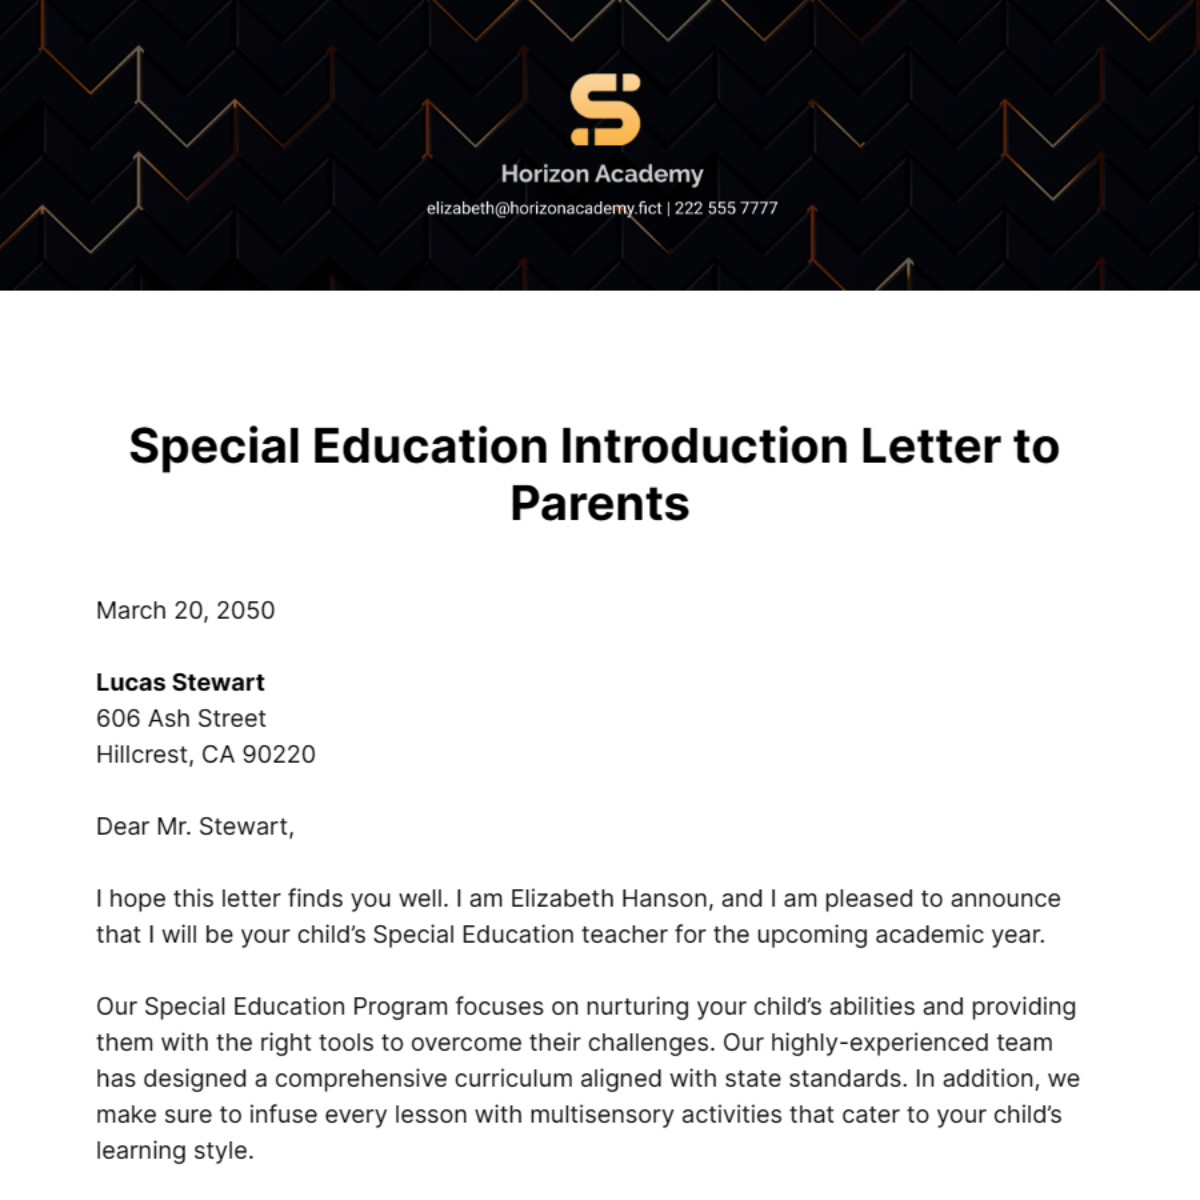 Special Education Introduction Letter to Parents Template